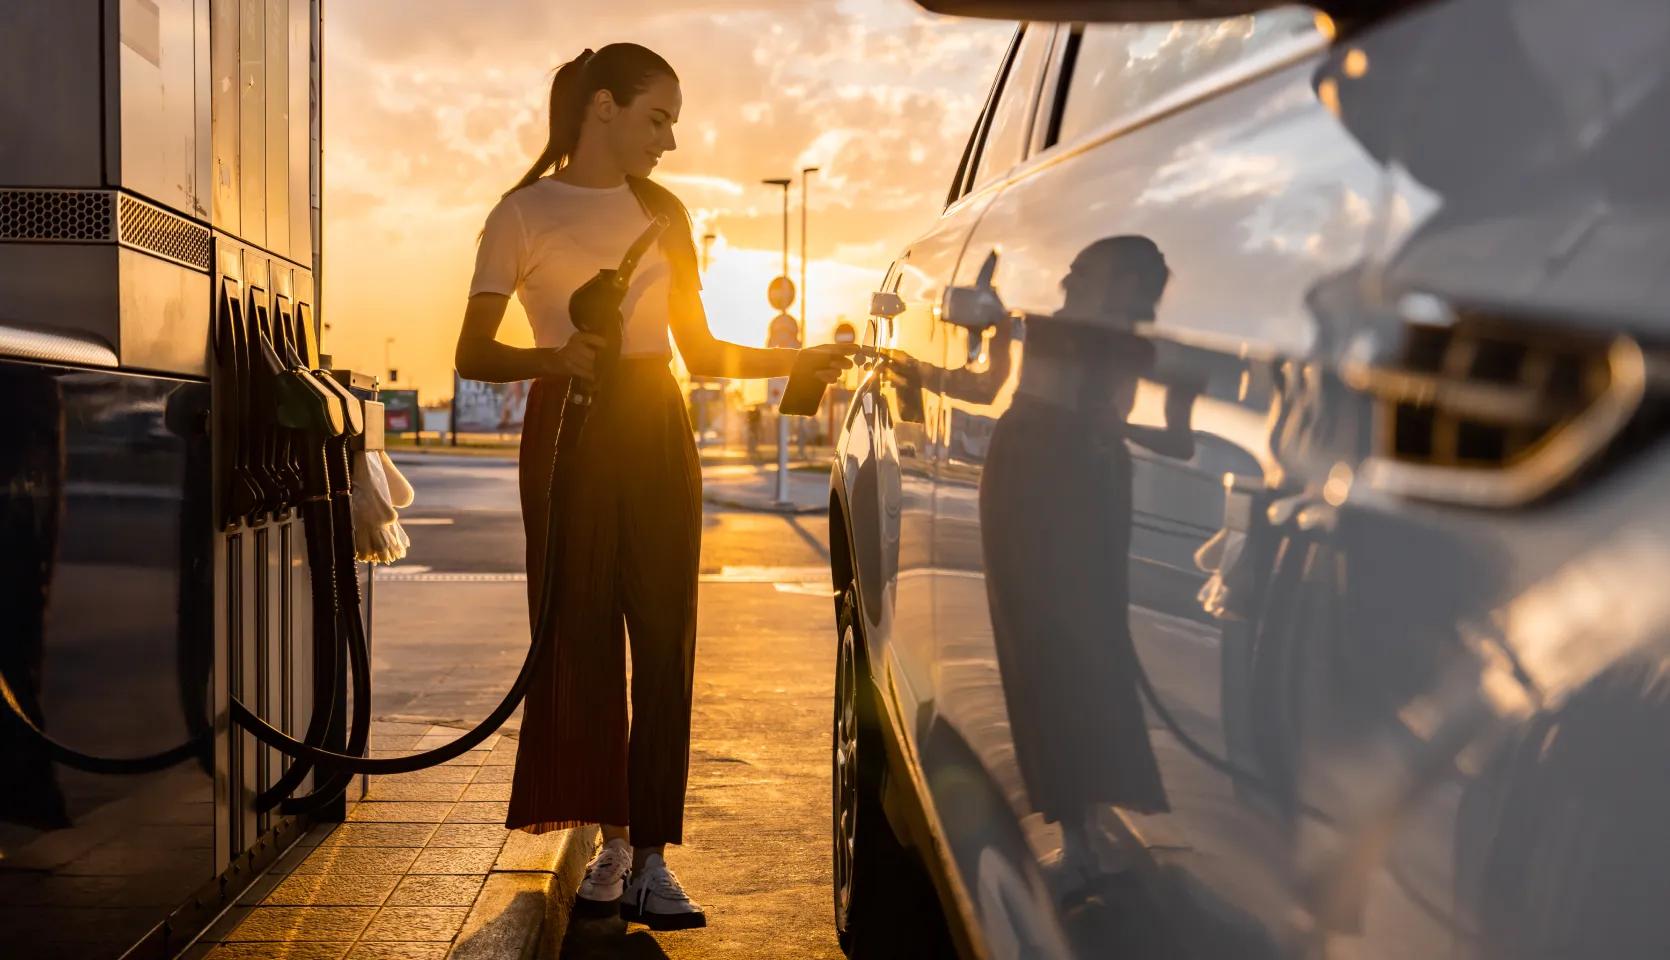 Woman fueling up her car at a gas station with a sunset in the background.